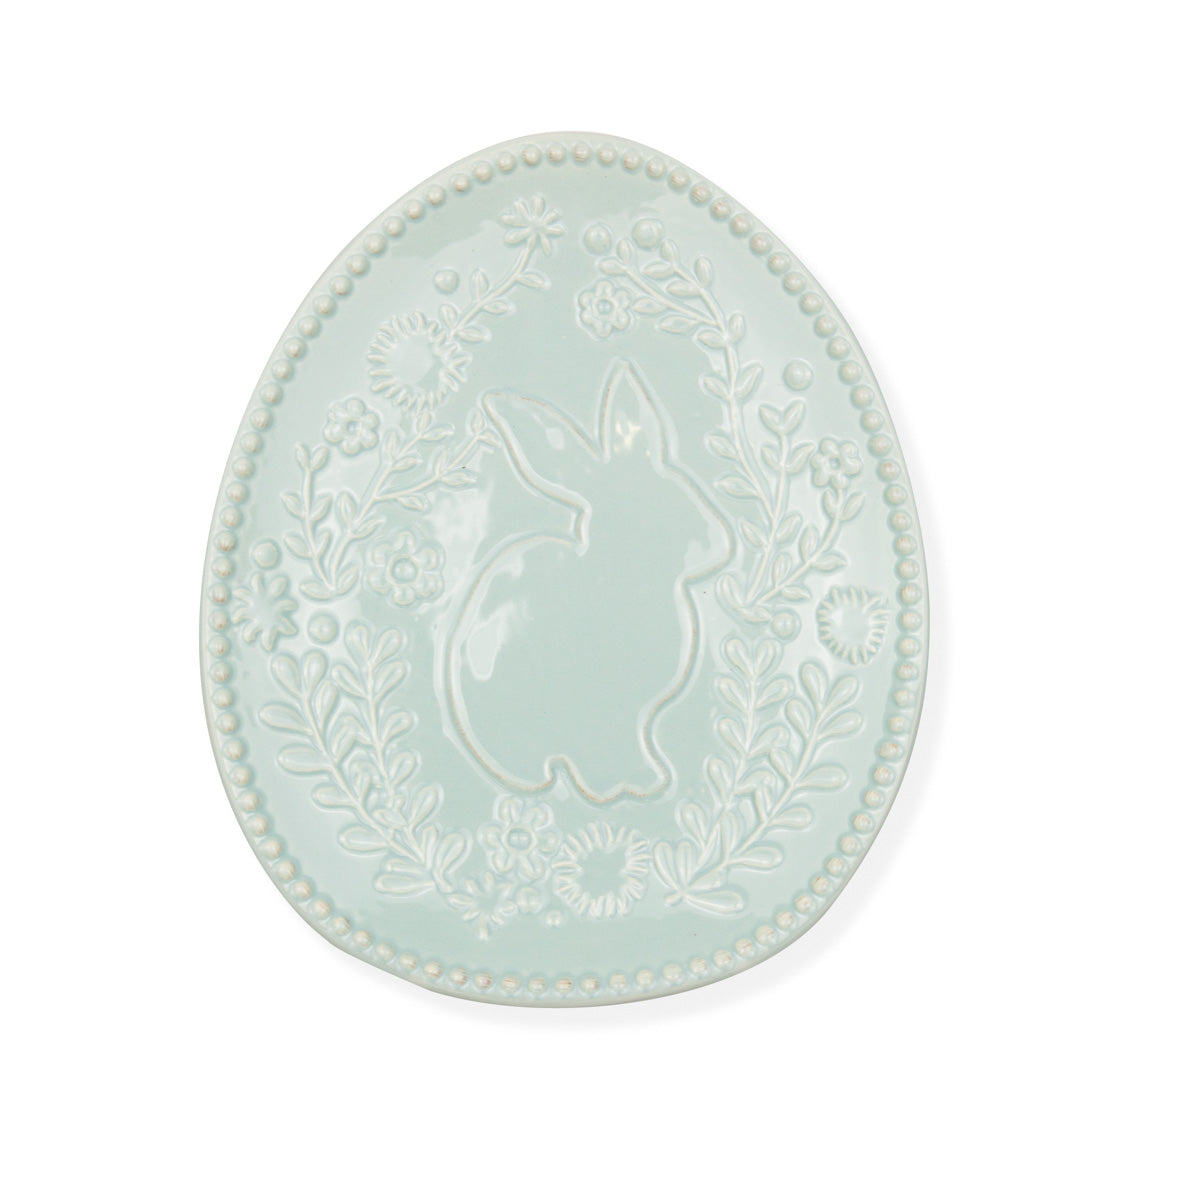 Embossed Floral Bunny Plate in Antique White